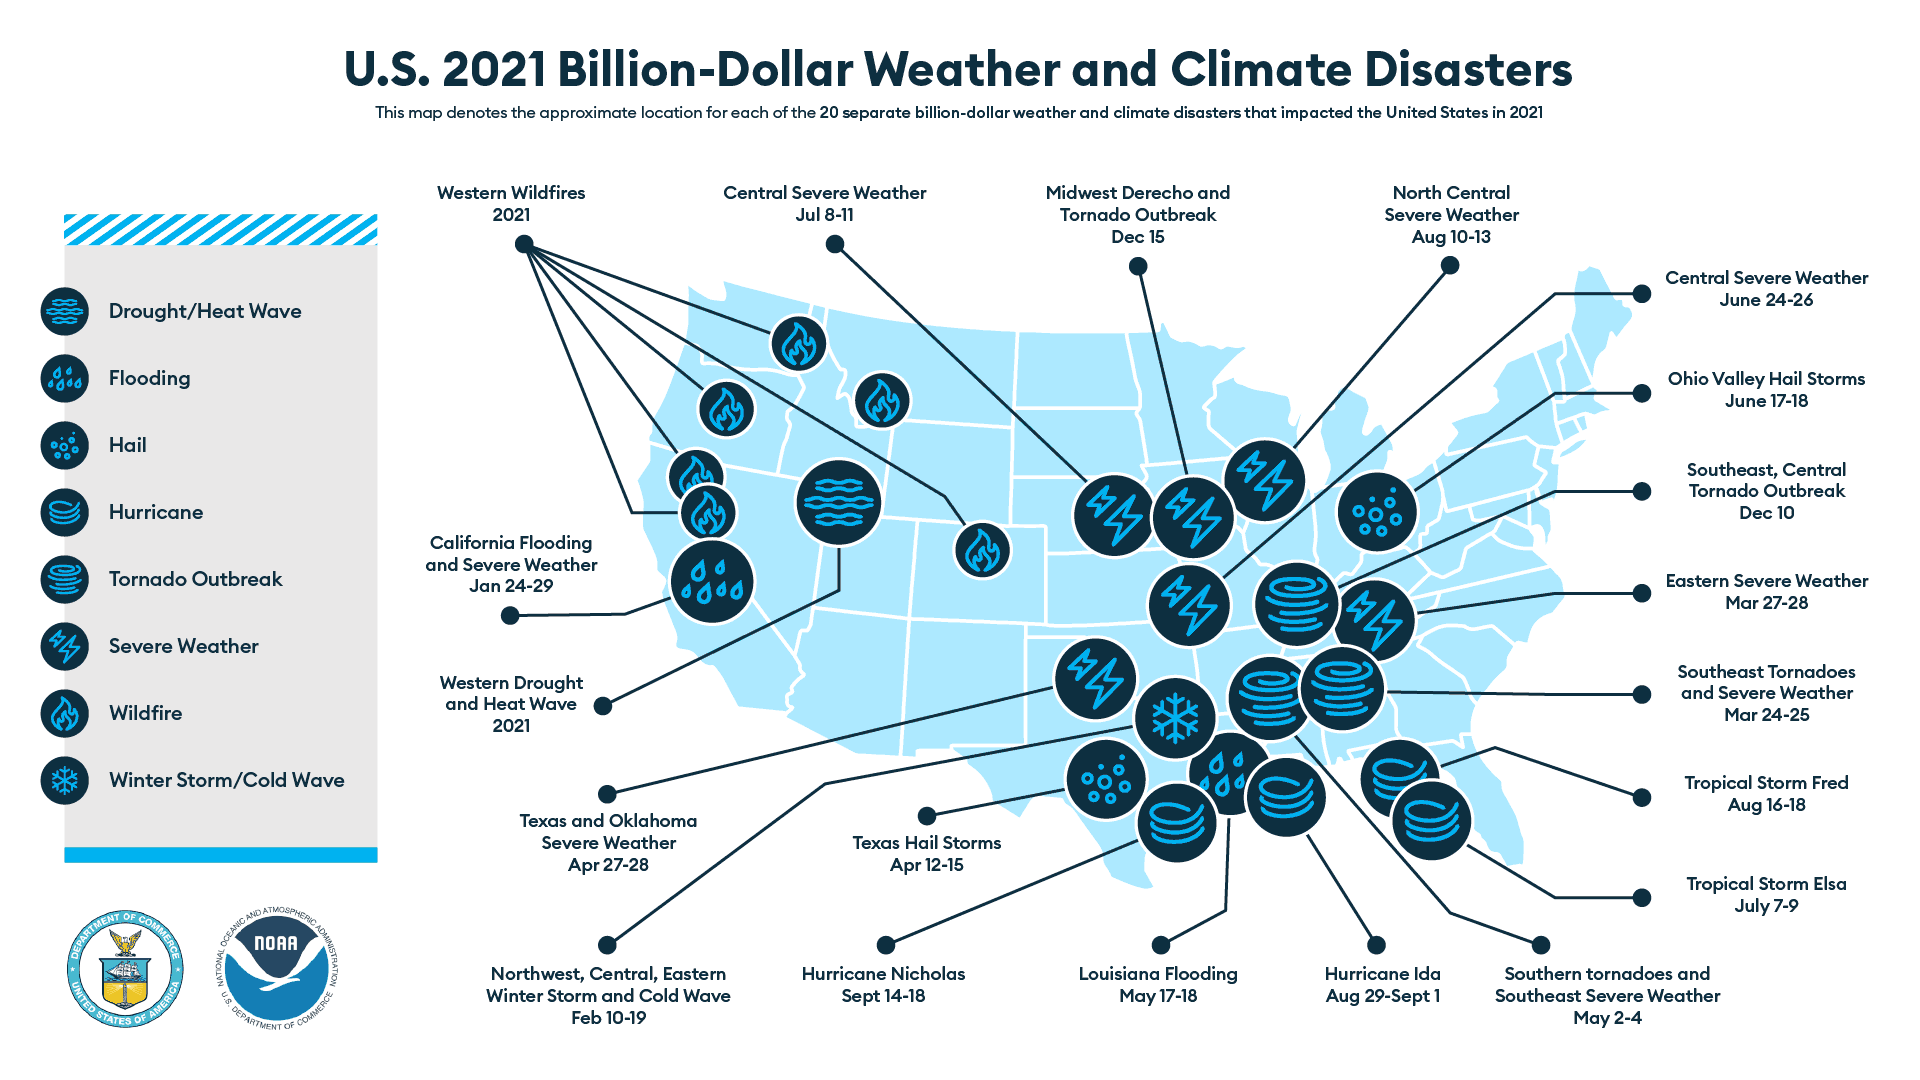 U.S 2021 Billion-Dollar Weather and Climate Disasters Map